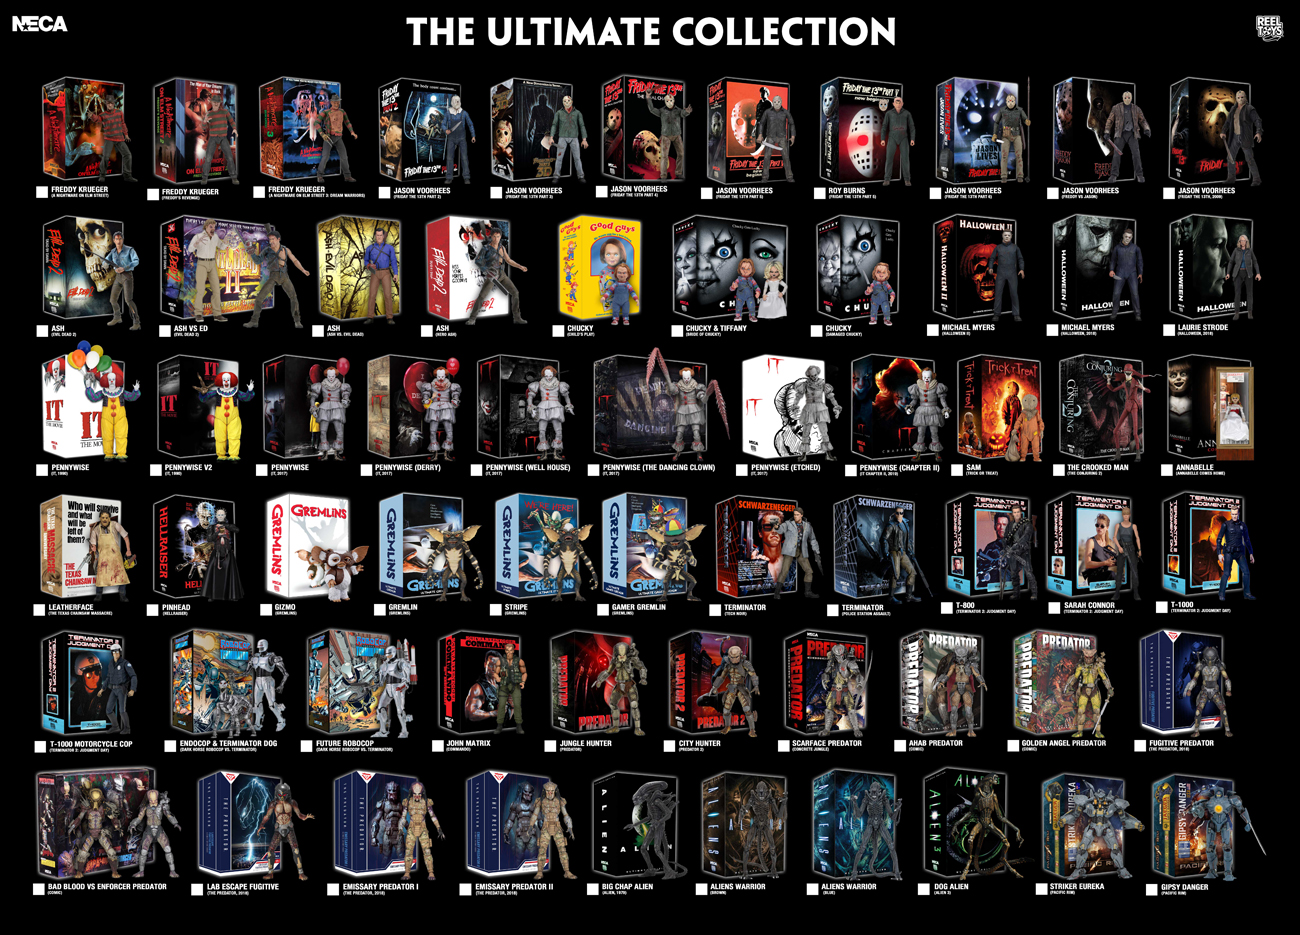 NECAOnline.com | 5 Days of Downloads 2019 – Day 5: Ultimates Action Figure Visual Guide